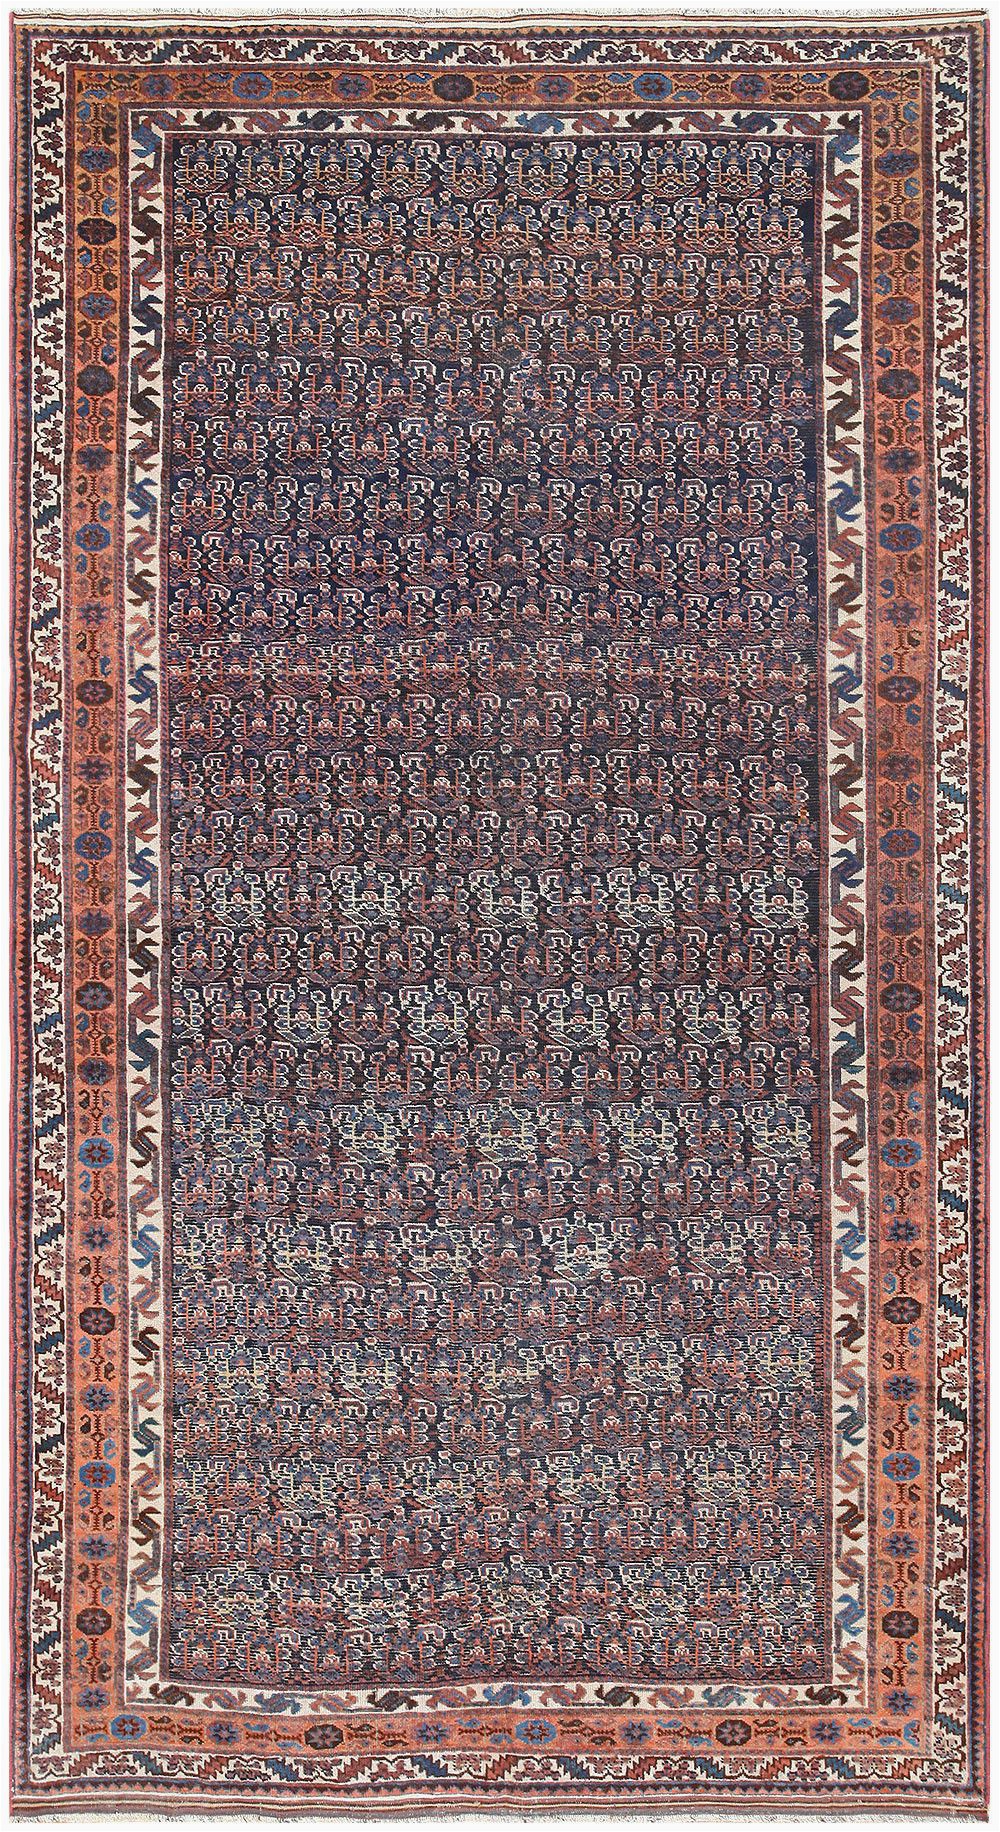 Area Rugs for Sale by Owner Antique Carpets